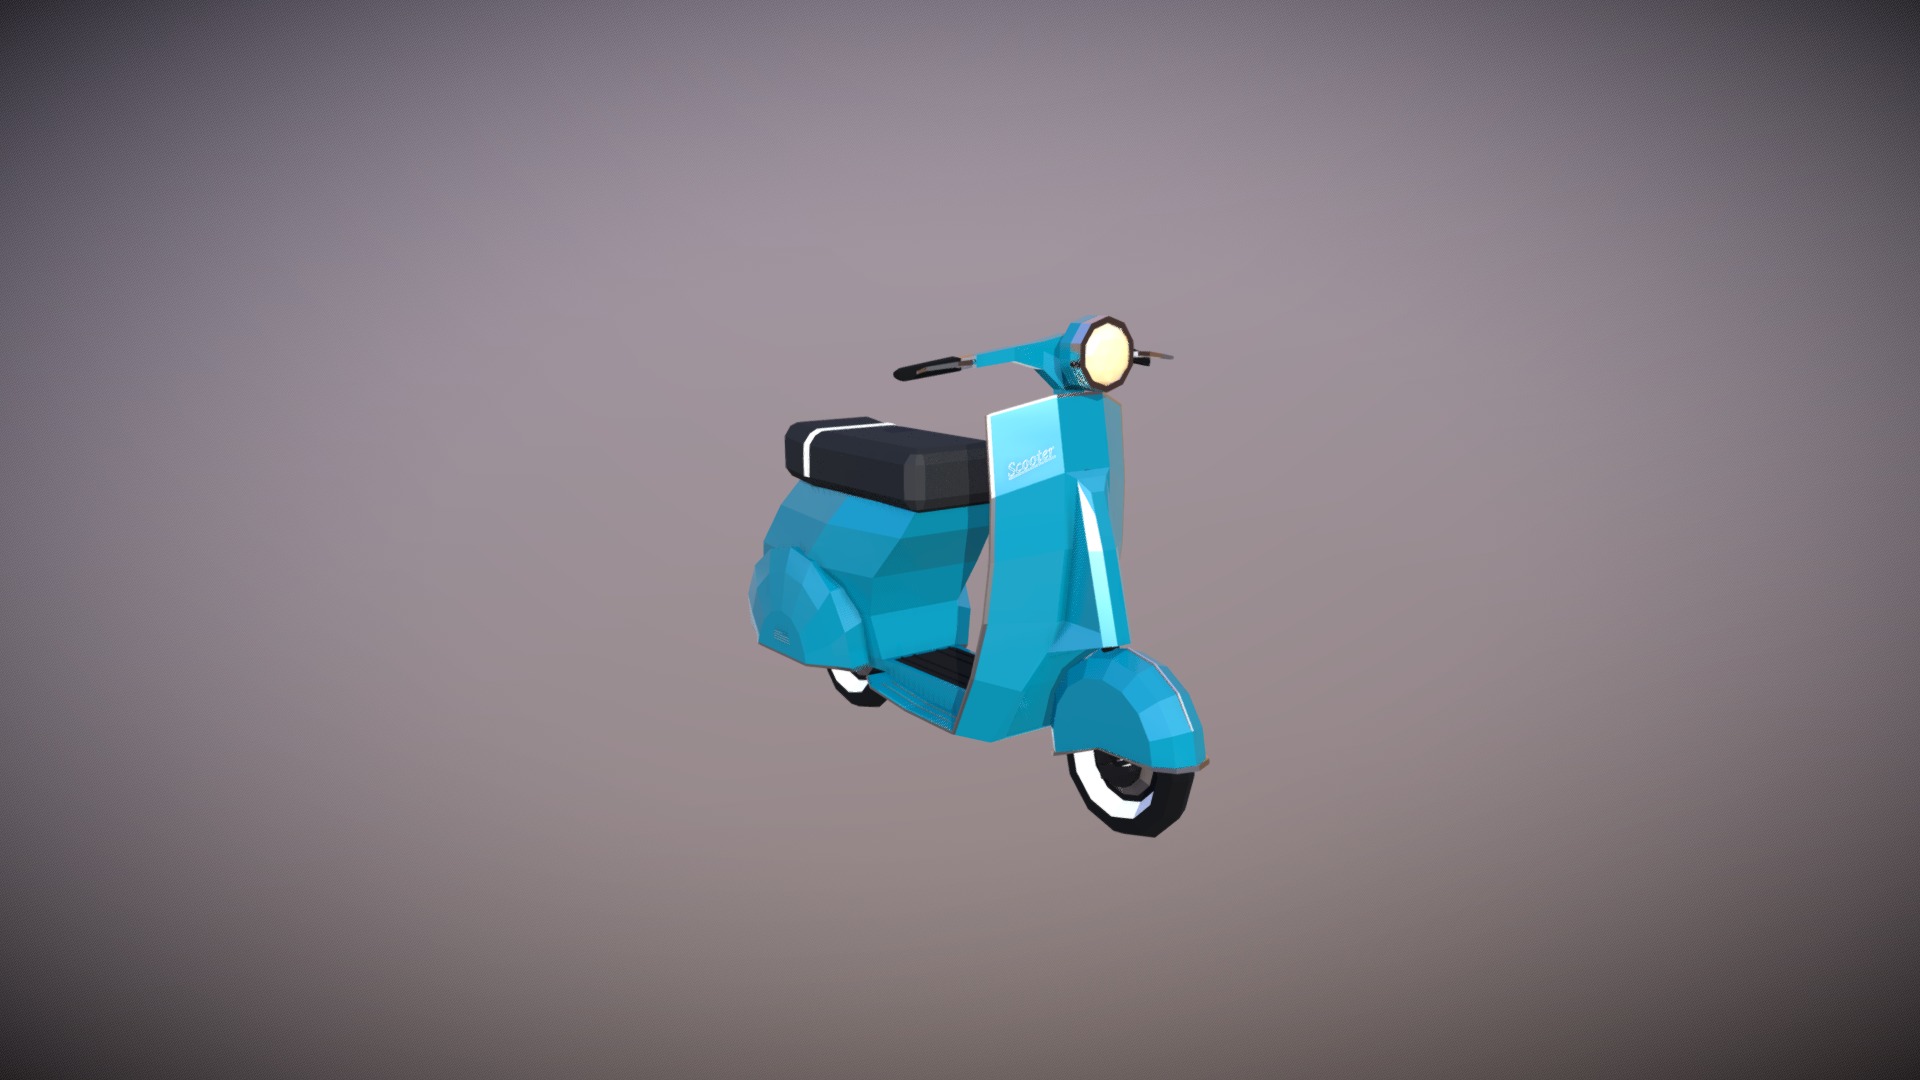 3D model Low Poly Scooter 01 - This is a 3D model of the Low Poly Scooter 01. The 3D model is about a blue and white toy car.